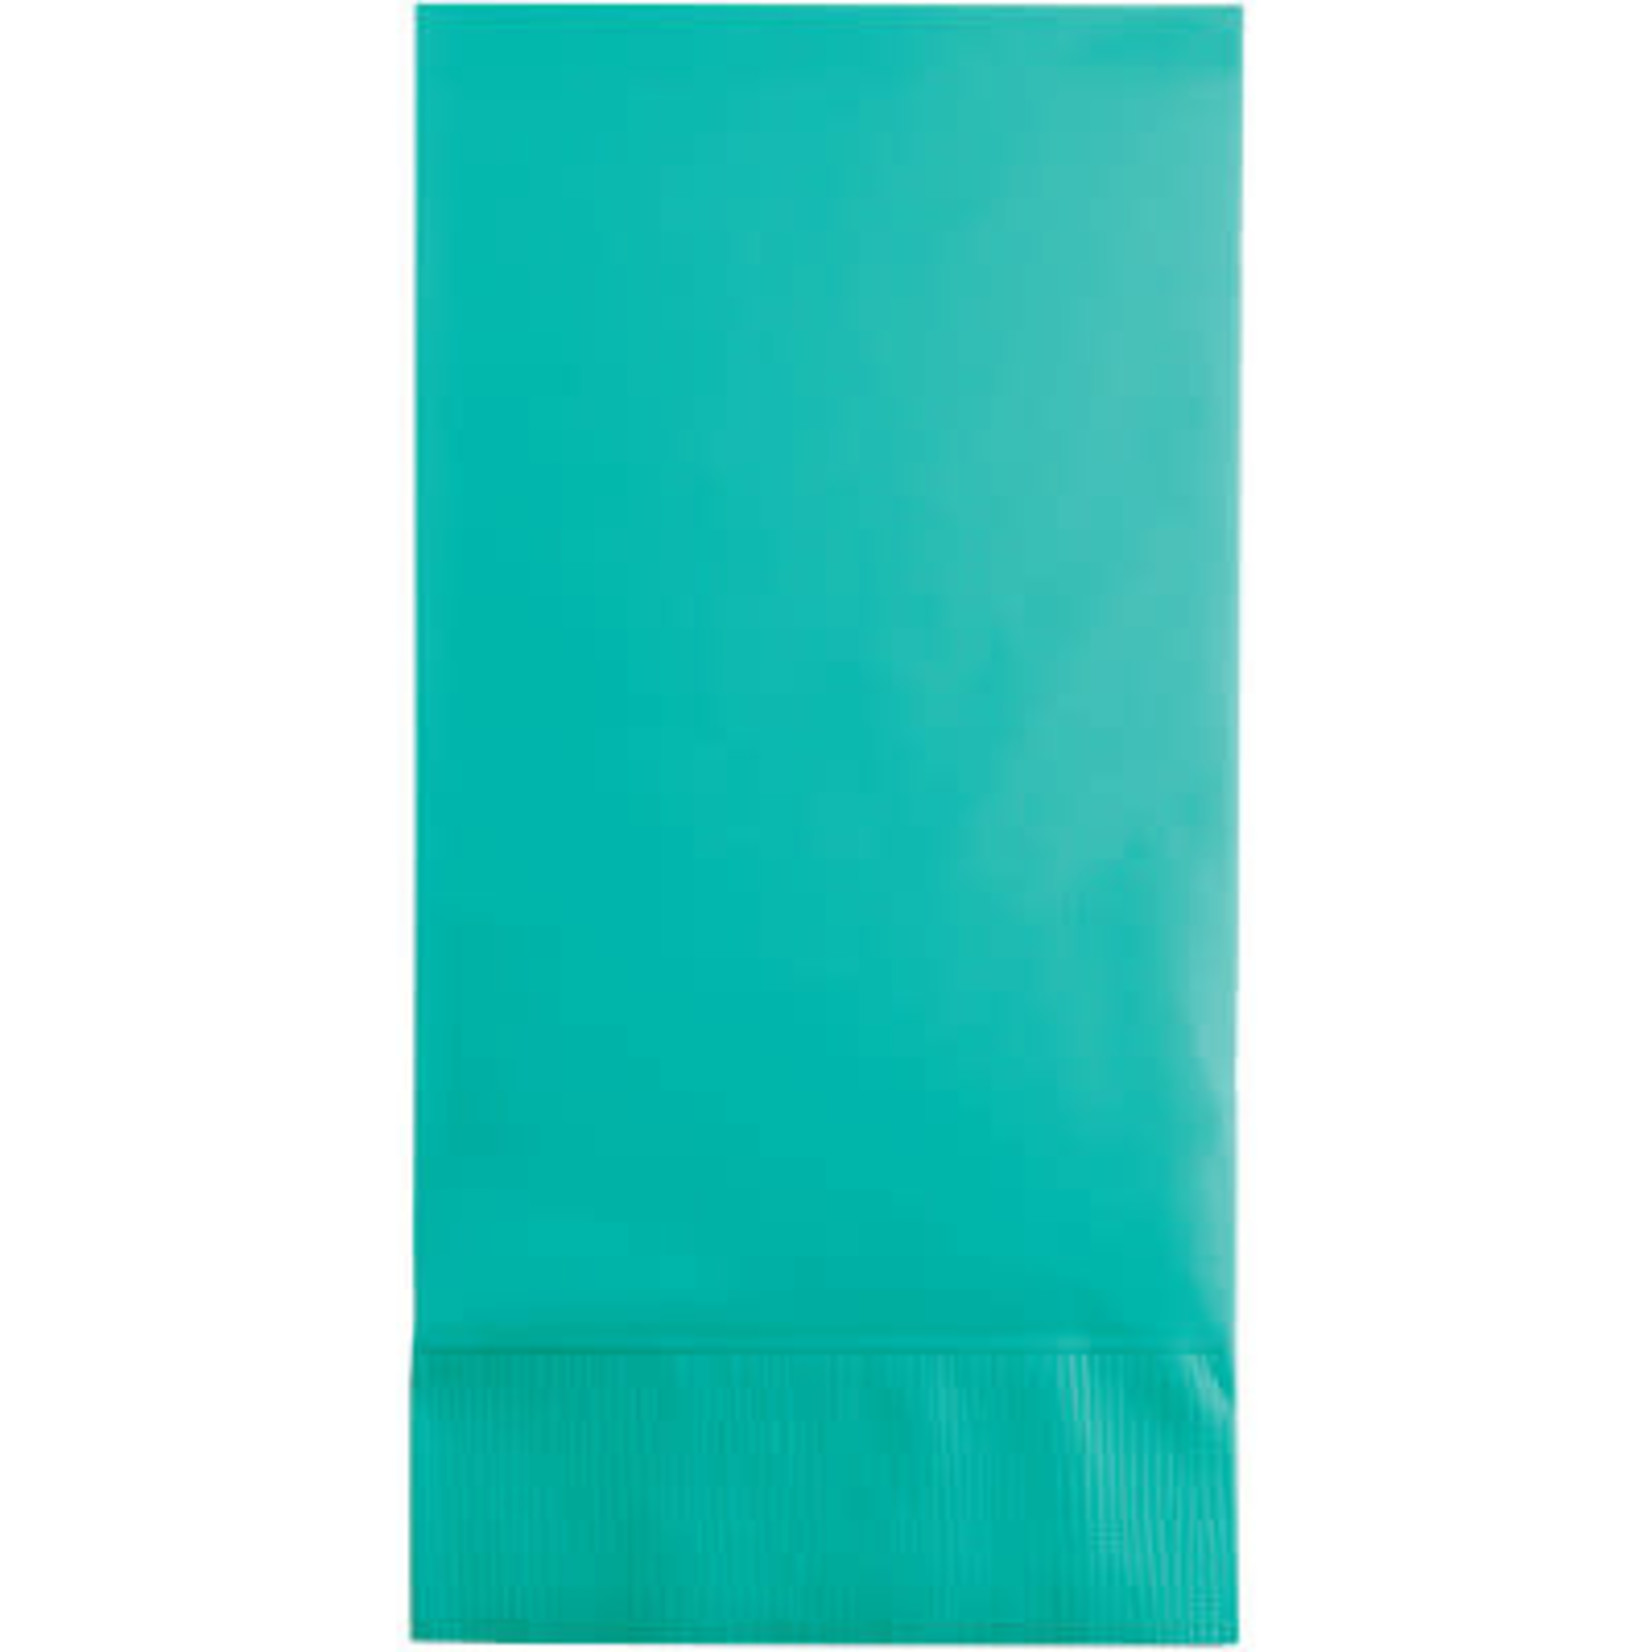 Touch of Color Teal Lagoon 3-Ply Guest Towels - 16ct.